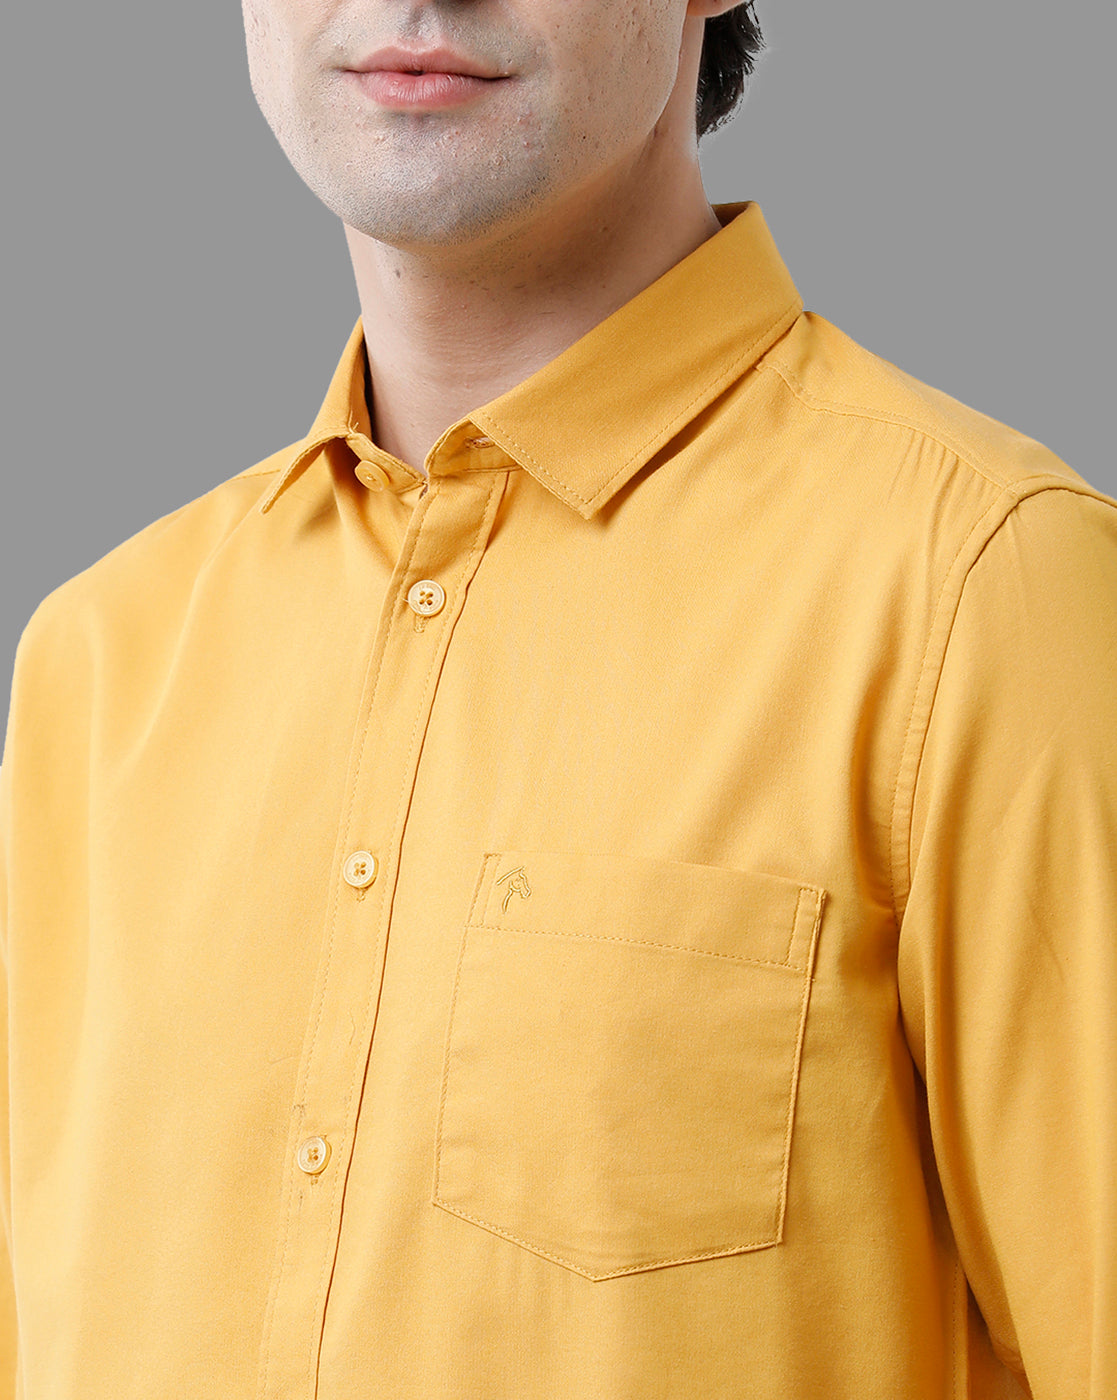 CP BRO Men's Cotton Full Sleeve Solid Slim Fit Polo Neck Yellow Color Woven Shirt | Sbn2-74 C